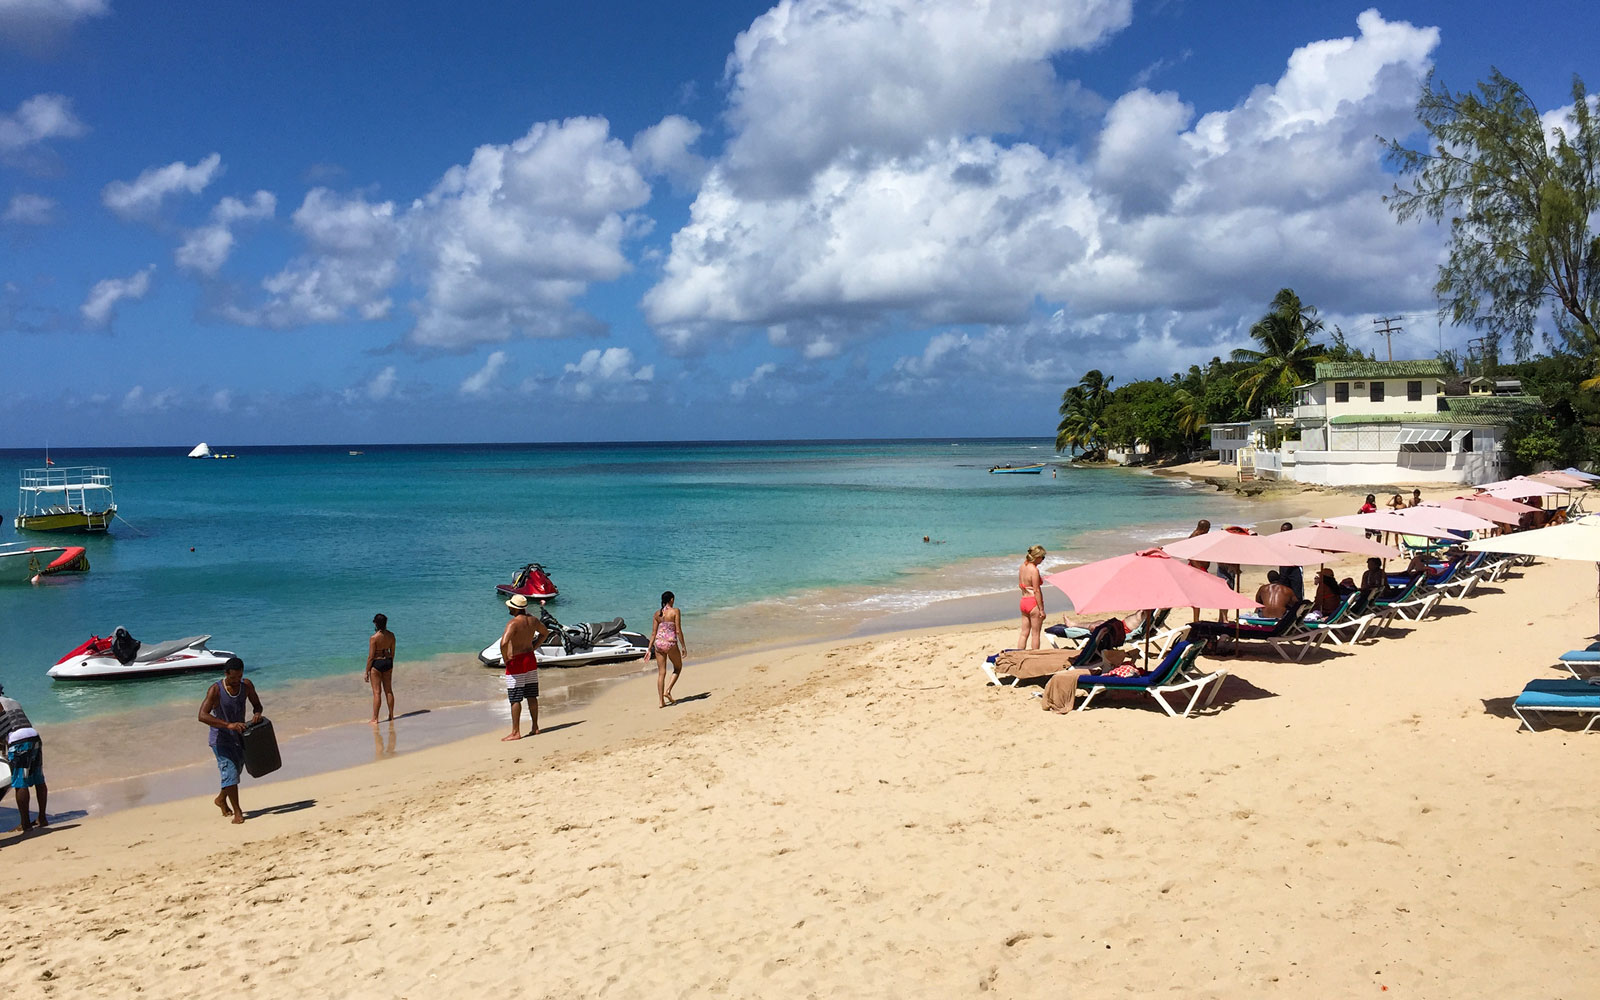 
Barbados tourism faces climate threats; businesses must go sustainable to survive.